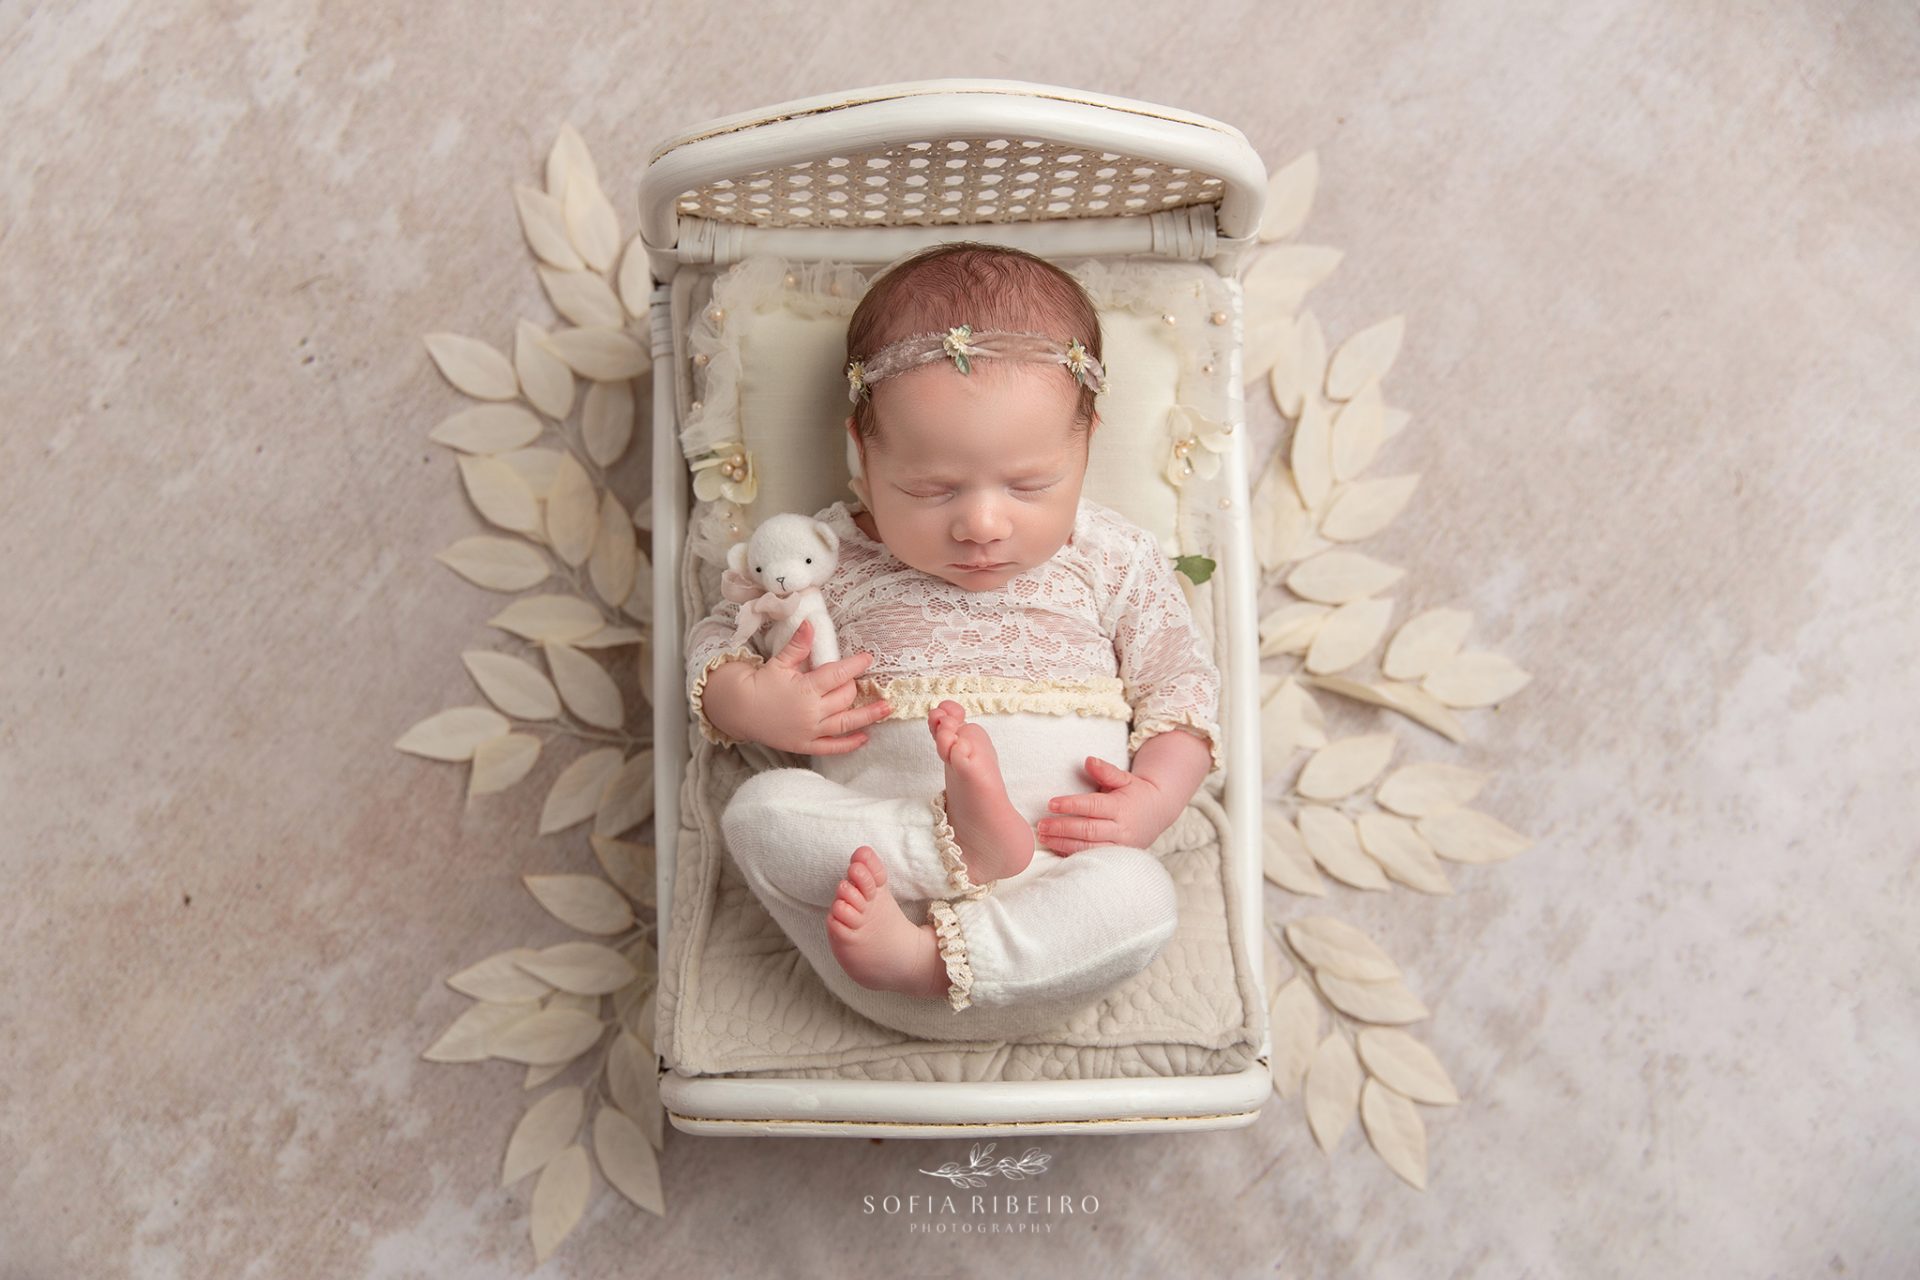 How to Choose a Newborn Photographer – 13 Questions to Ask